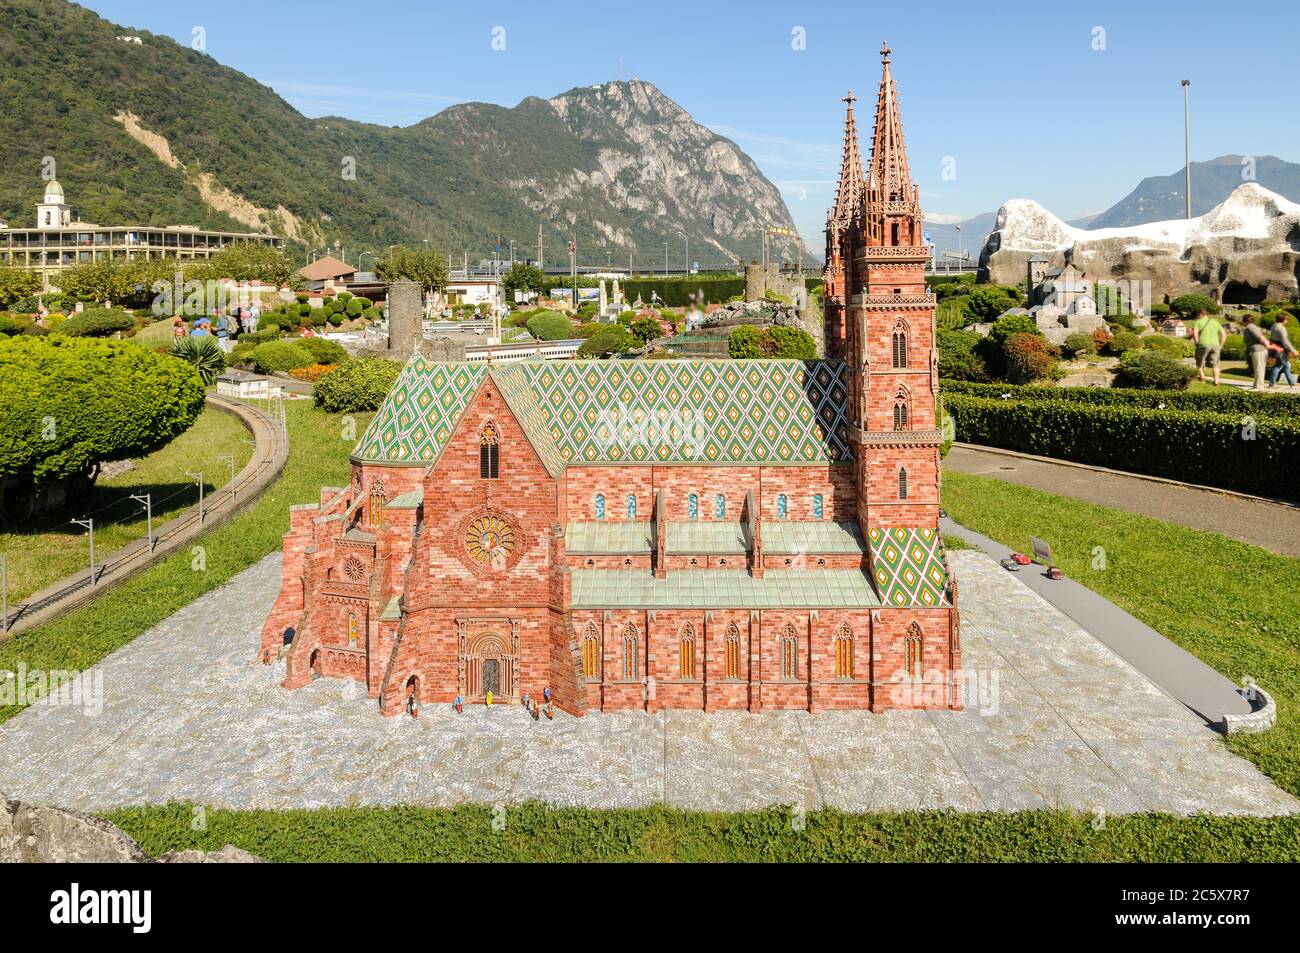 Melide, Ticino, Switzerland - September 25, 2014: Swissminiatur, is a Swiss miniature park, located in Melide, on the shores of Lake Lugano. Stock Photo